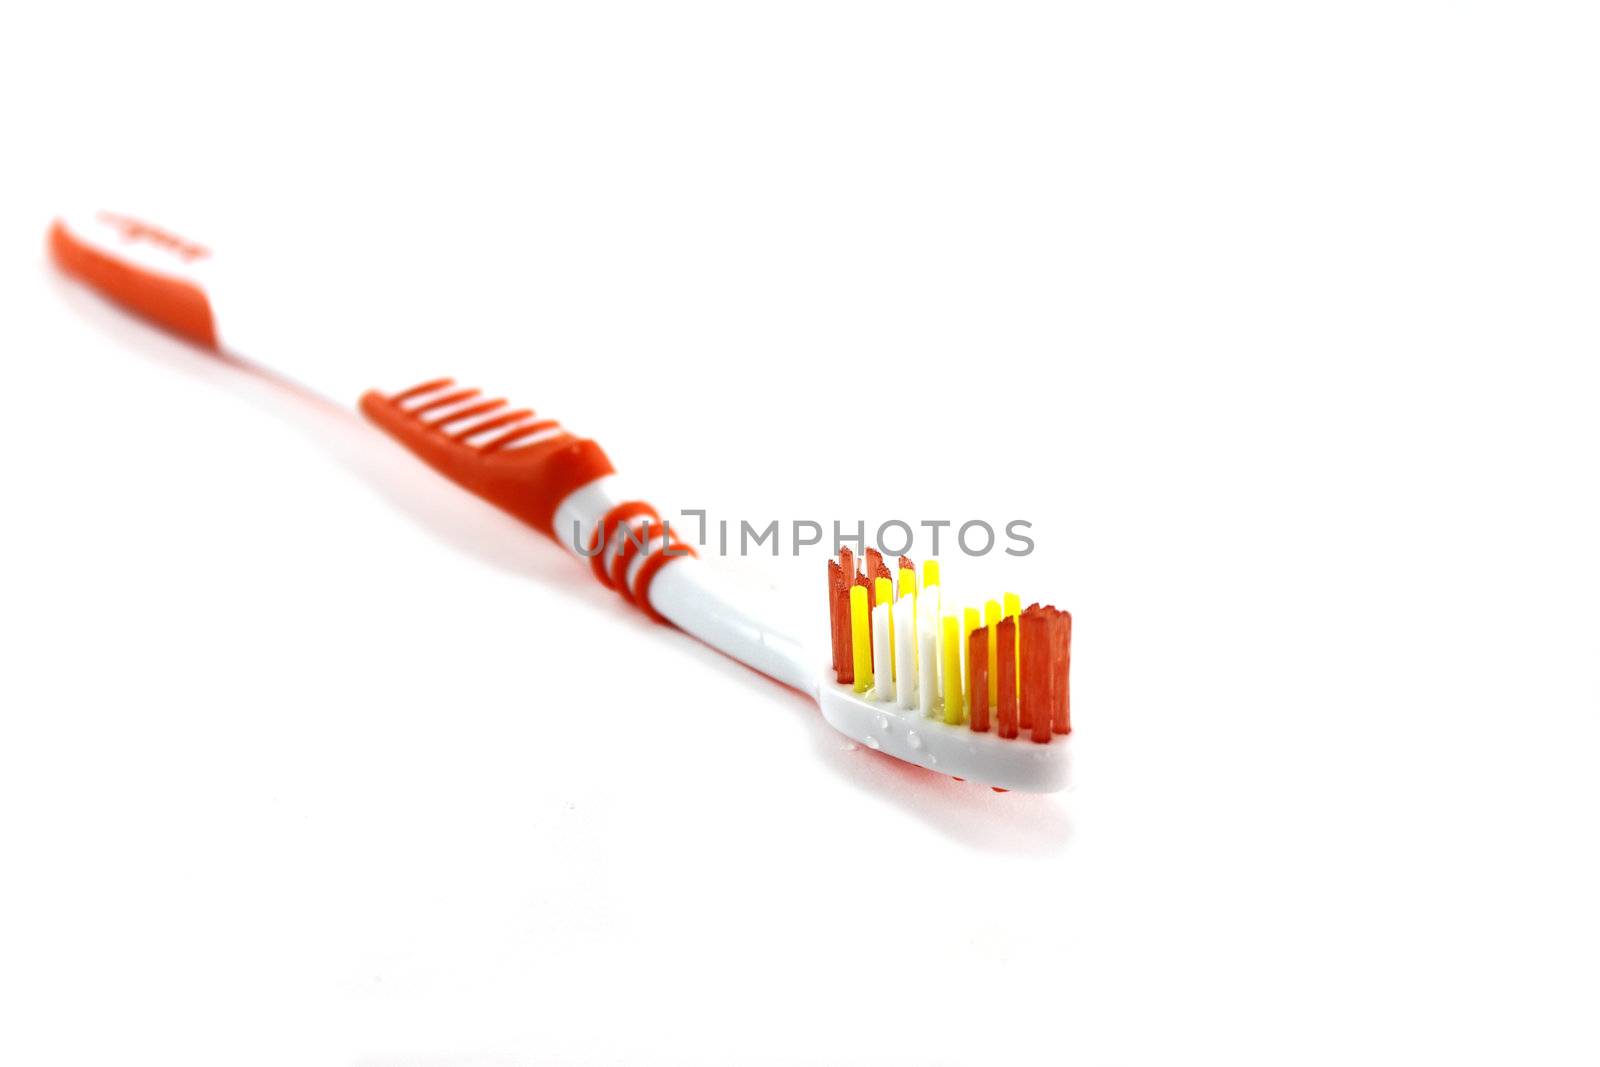 Close up of a orange toothbrush over white background